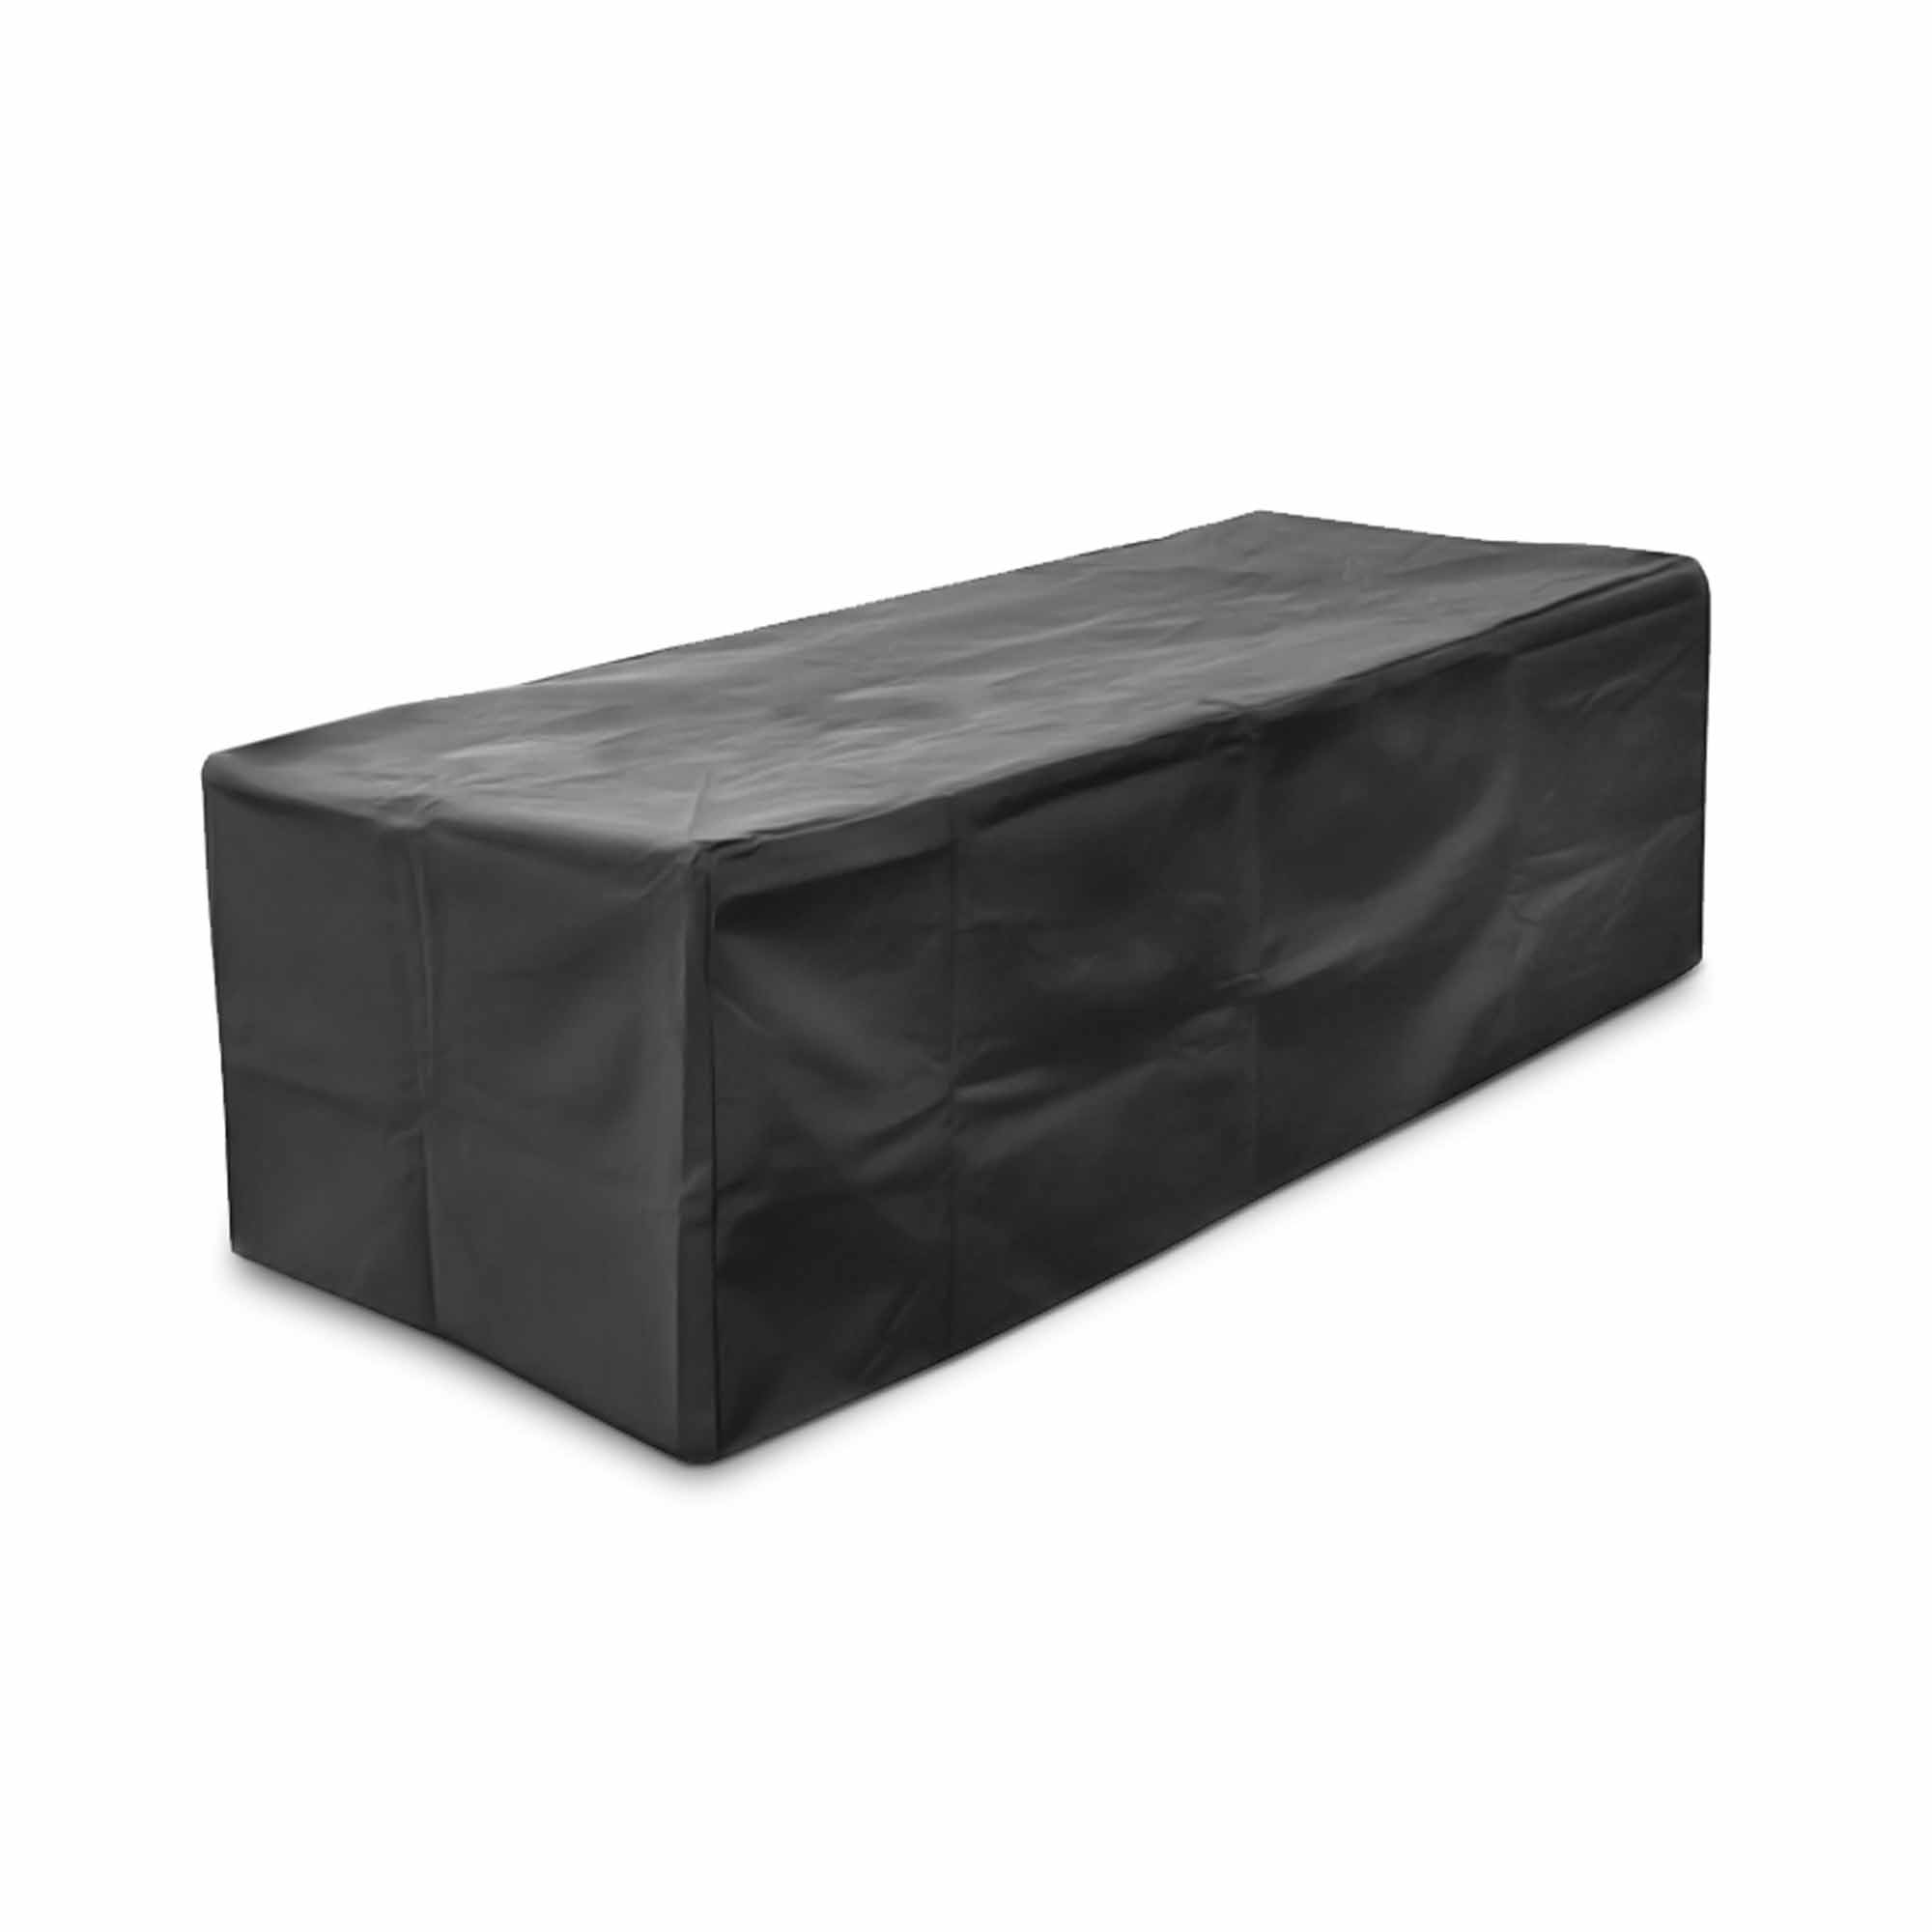 Rectangular Fire Pit Covers The, Flat Fire Pit Covers